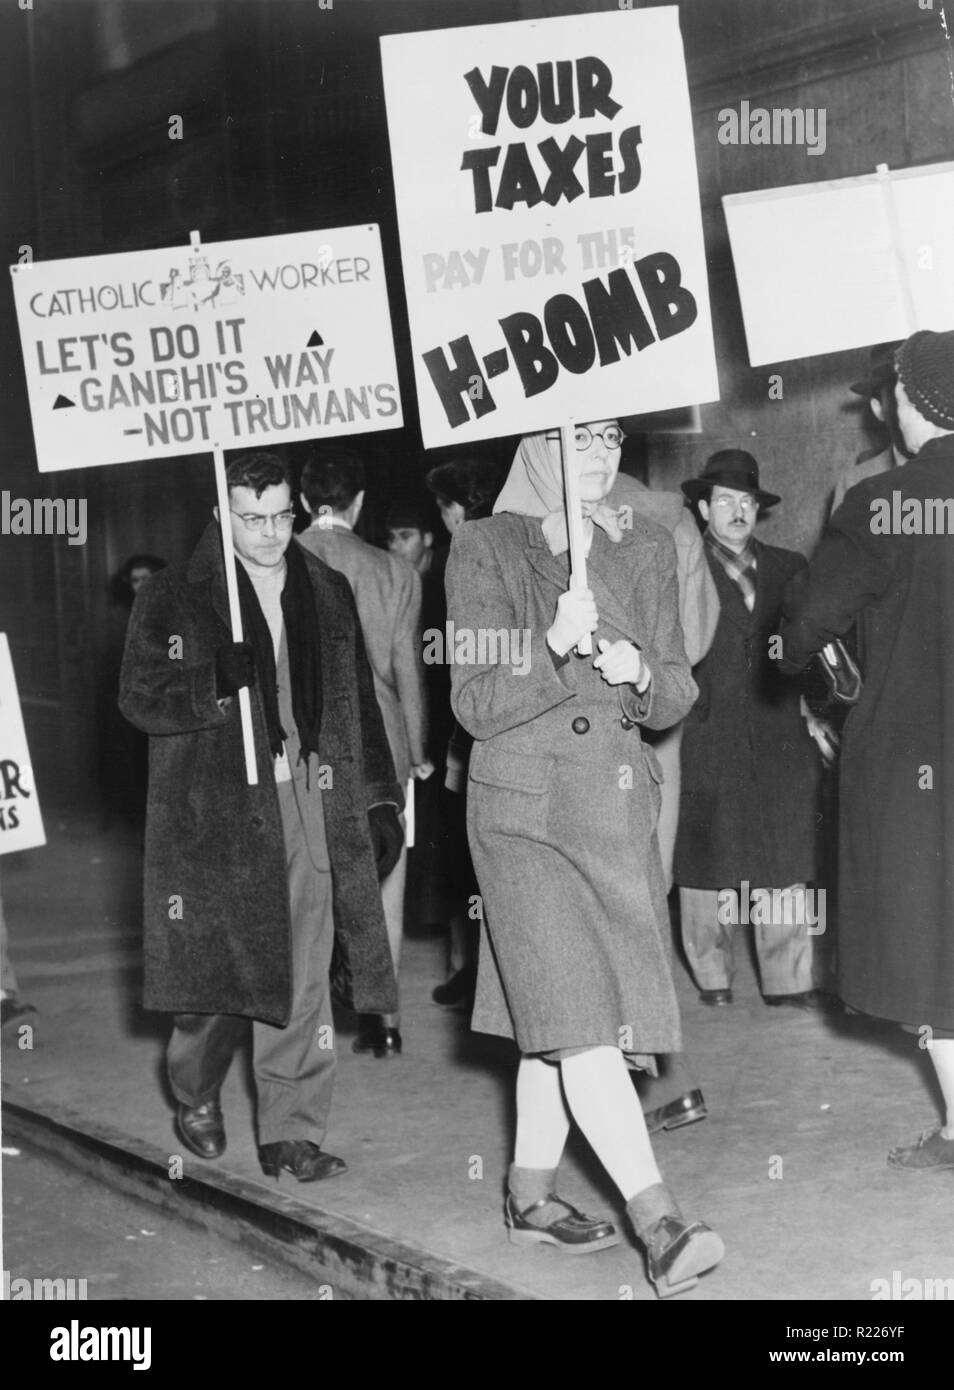 American protesters picketing against the use of tax dollars for the development of nuclear weapons]. Photo by Fred Palumbo. 1950 Stock Photo